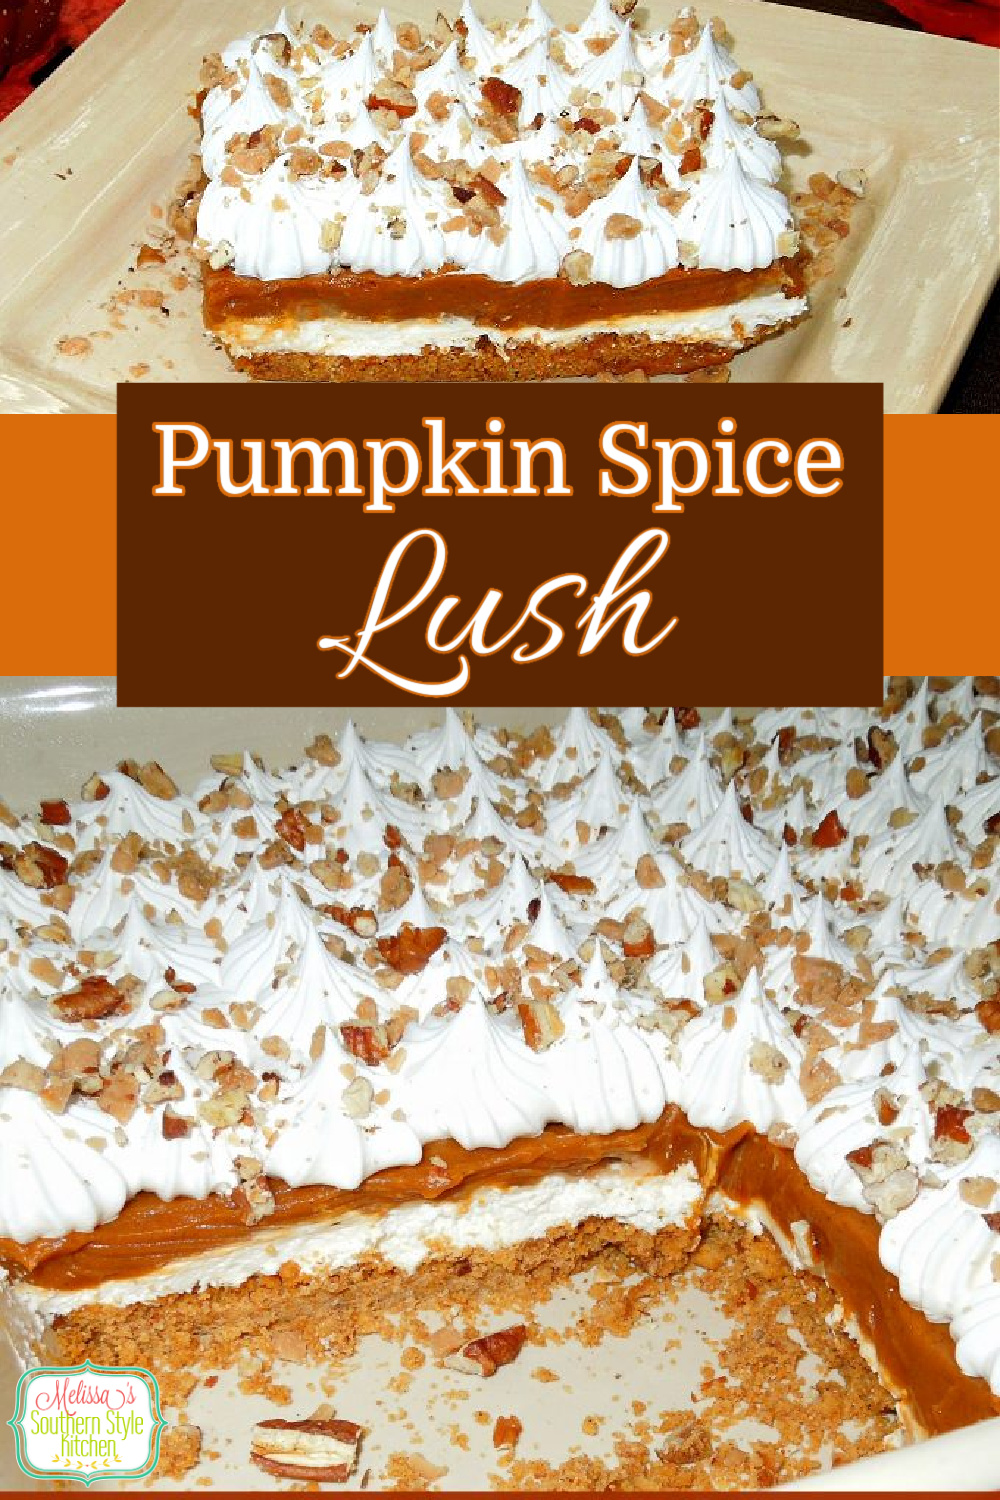 This Pumpkin Spice Layered Lush Dessert is a seasonal spinoff that's a must for your holiday desserts table #pumpkinspice #pumpkinspicelayeredlush #lushrecipes #pumpkin #pumpkinrecipes #thanksgivingrecipes #holidaybaking #thanksgivingdesserts #lush #southernfood #southernrecipes